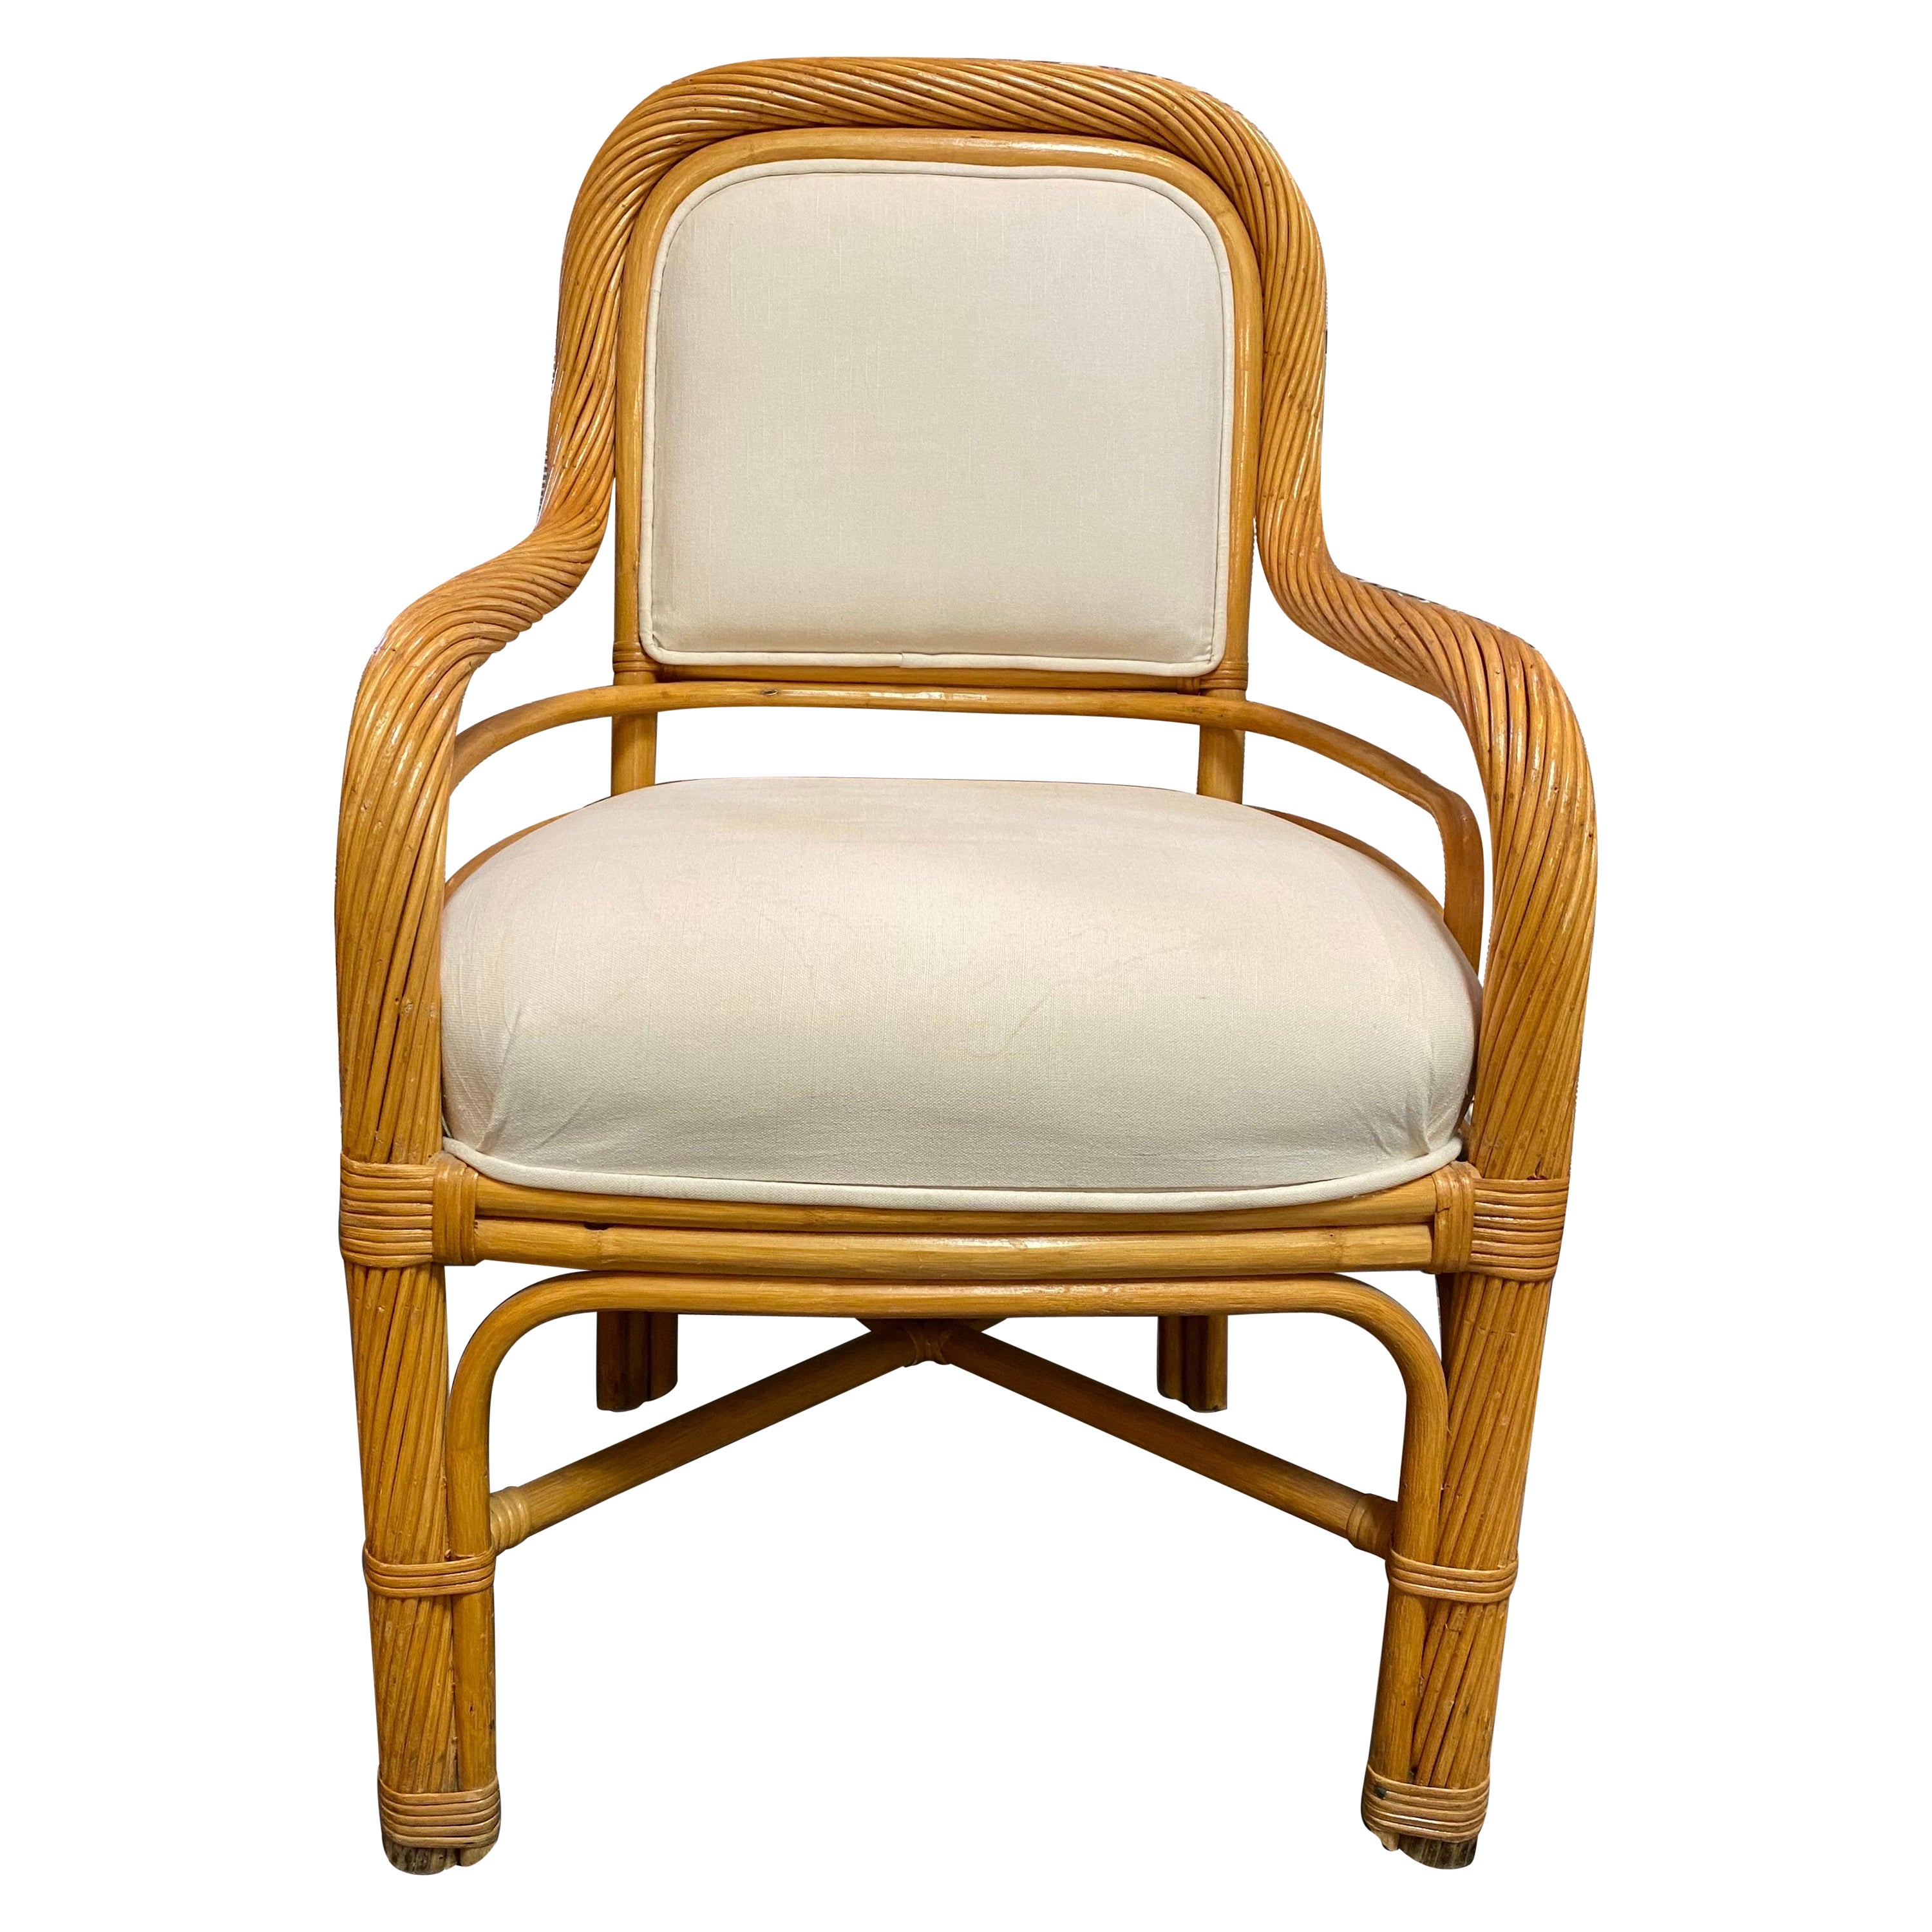 1980s Midcentury Boho Chic Rattan and Bamboo Side Chair For Sale